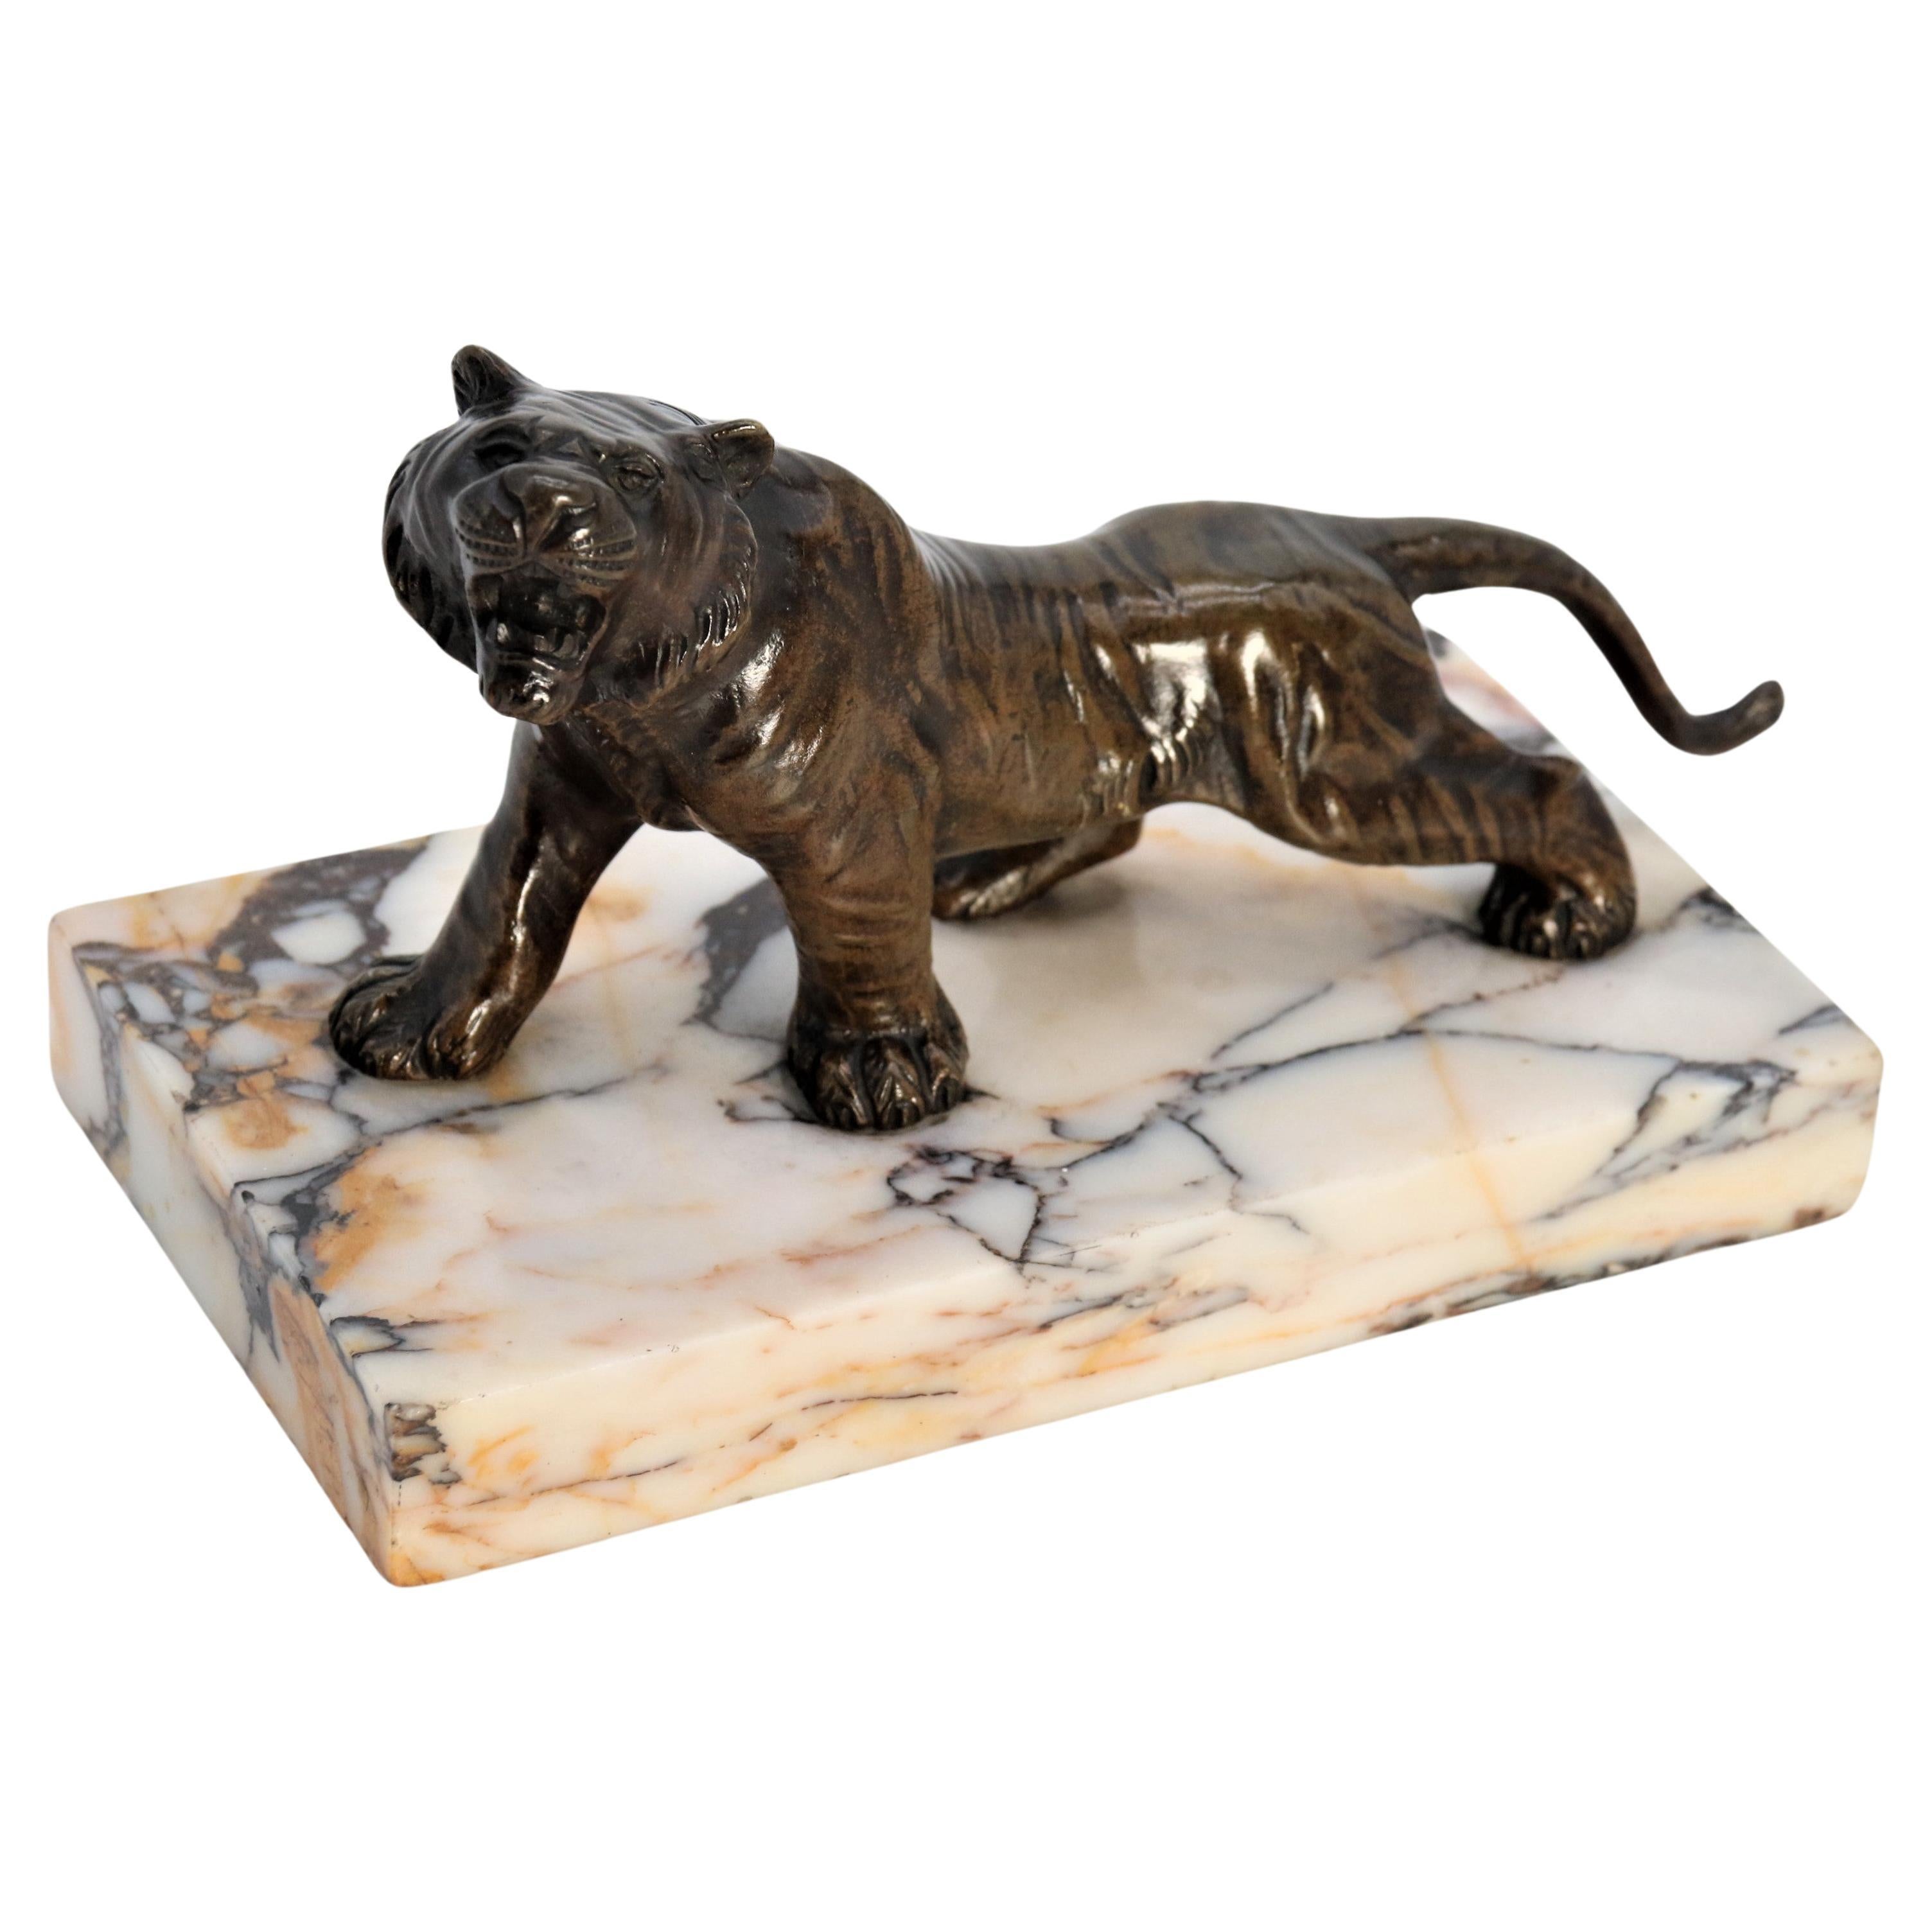 A  19th century French bronze study of a tiger on a marble base circa 1890